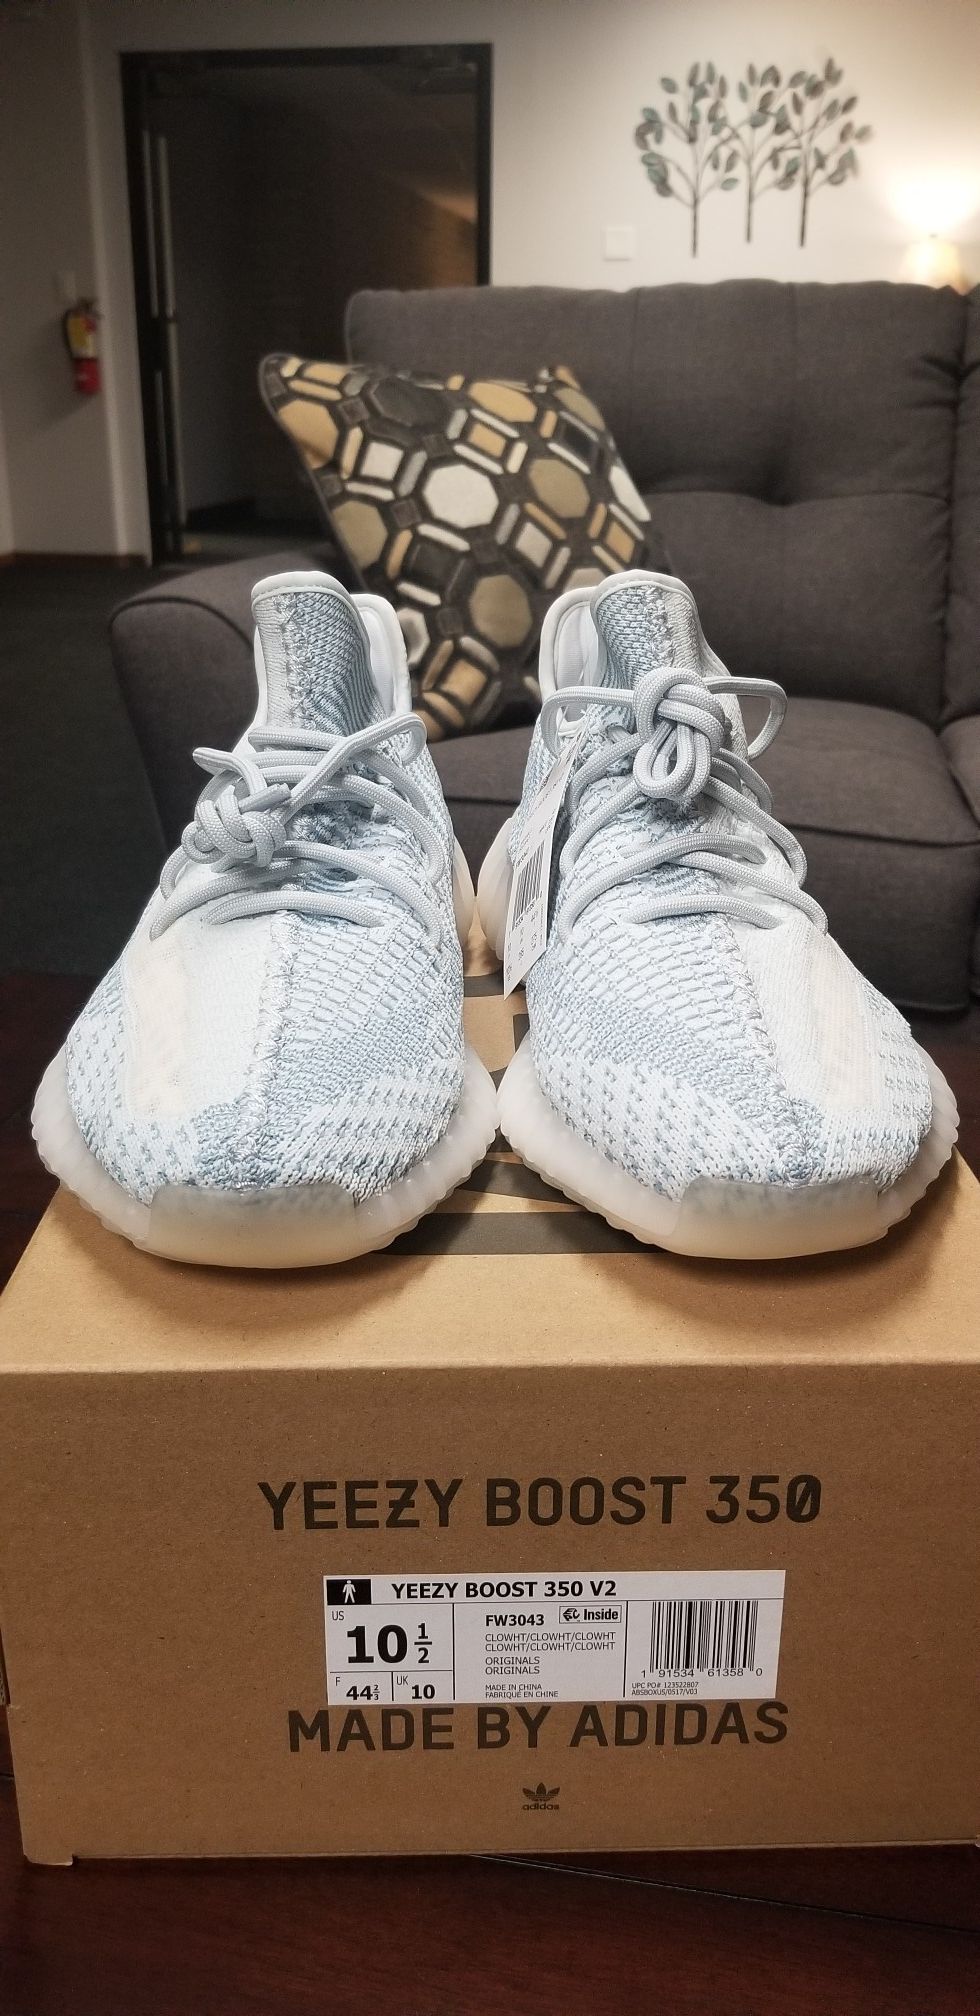 DS Yeezy Cloud White (size 10.5)